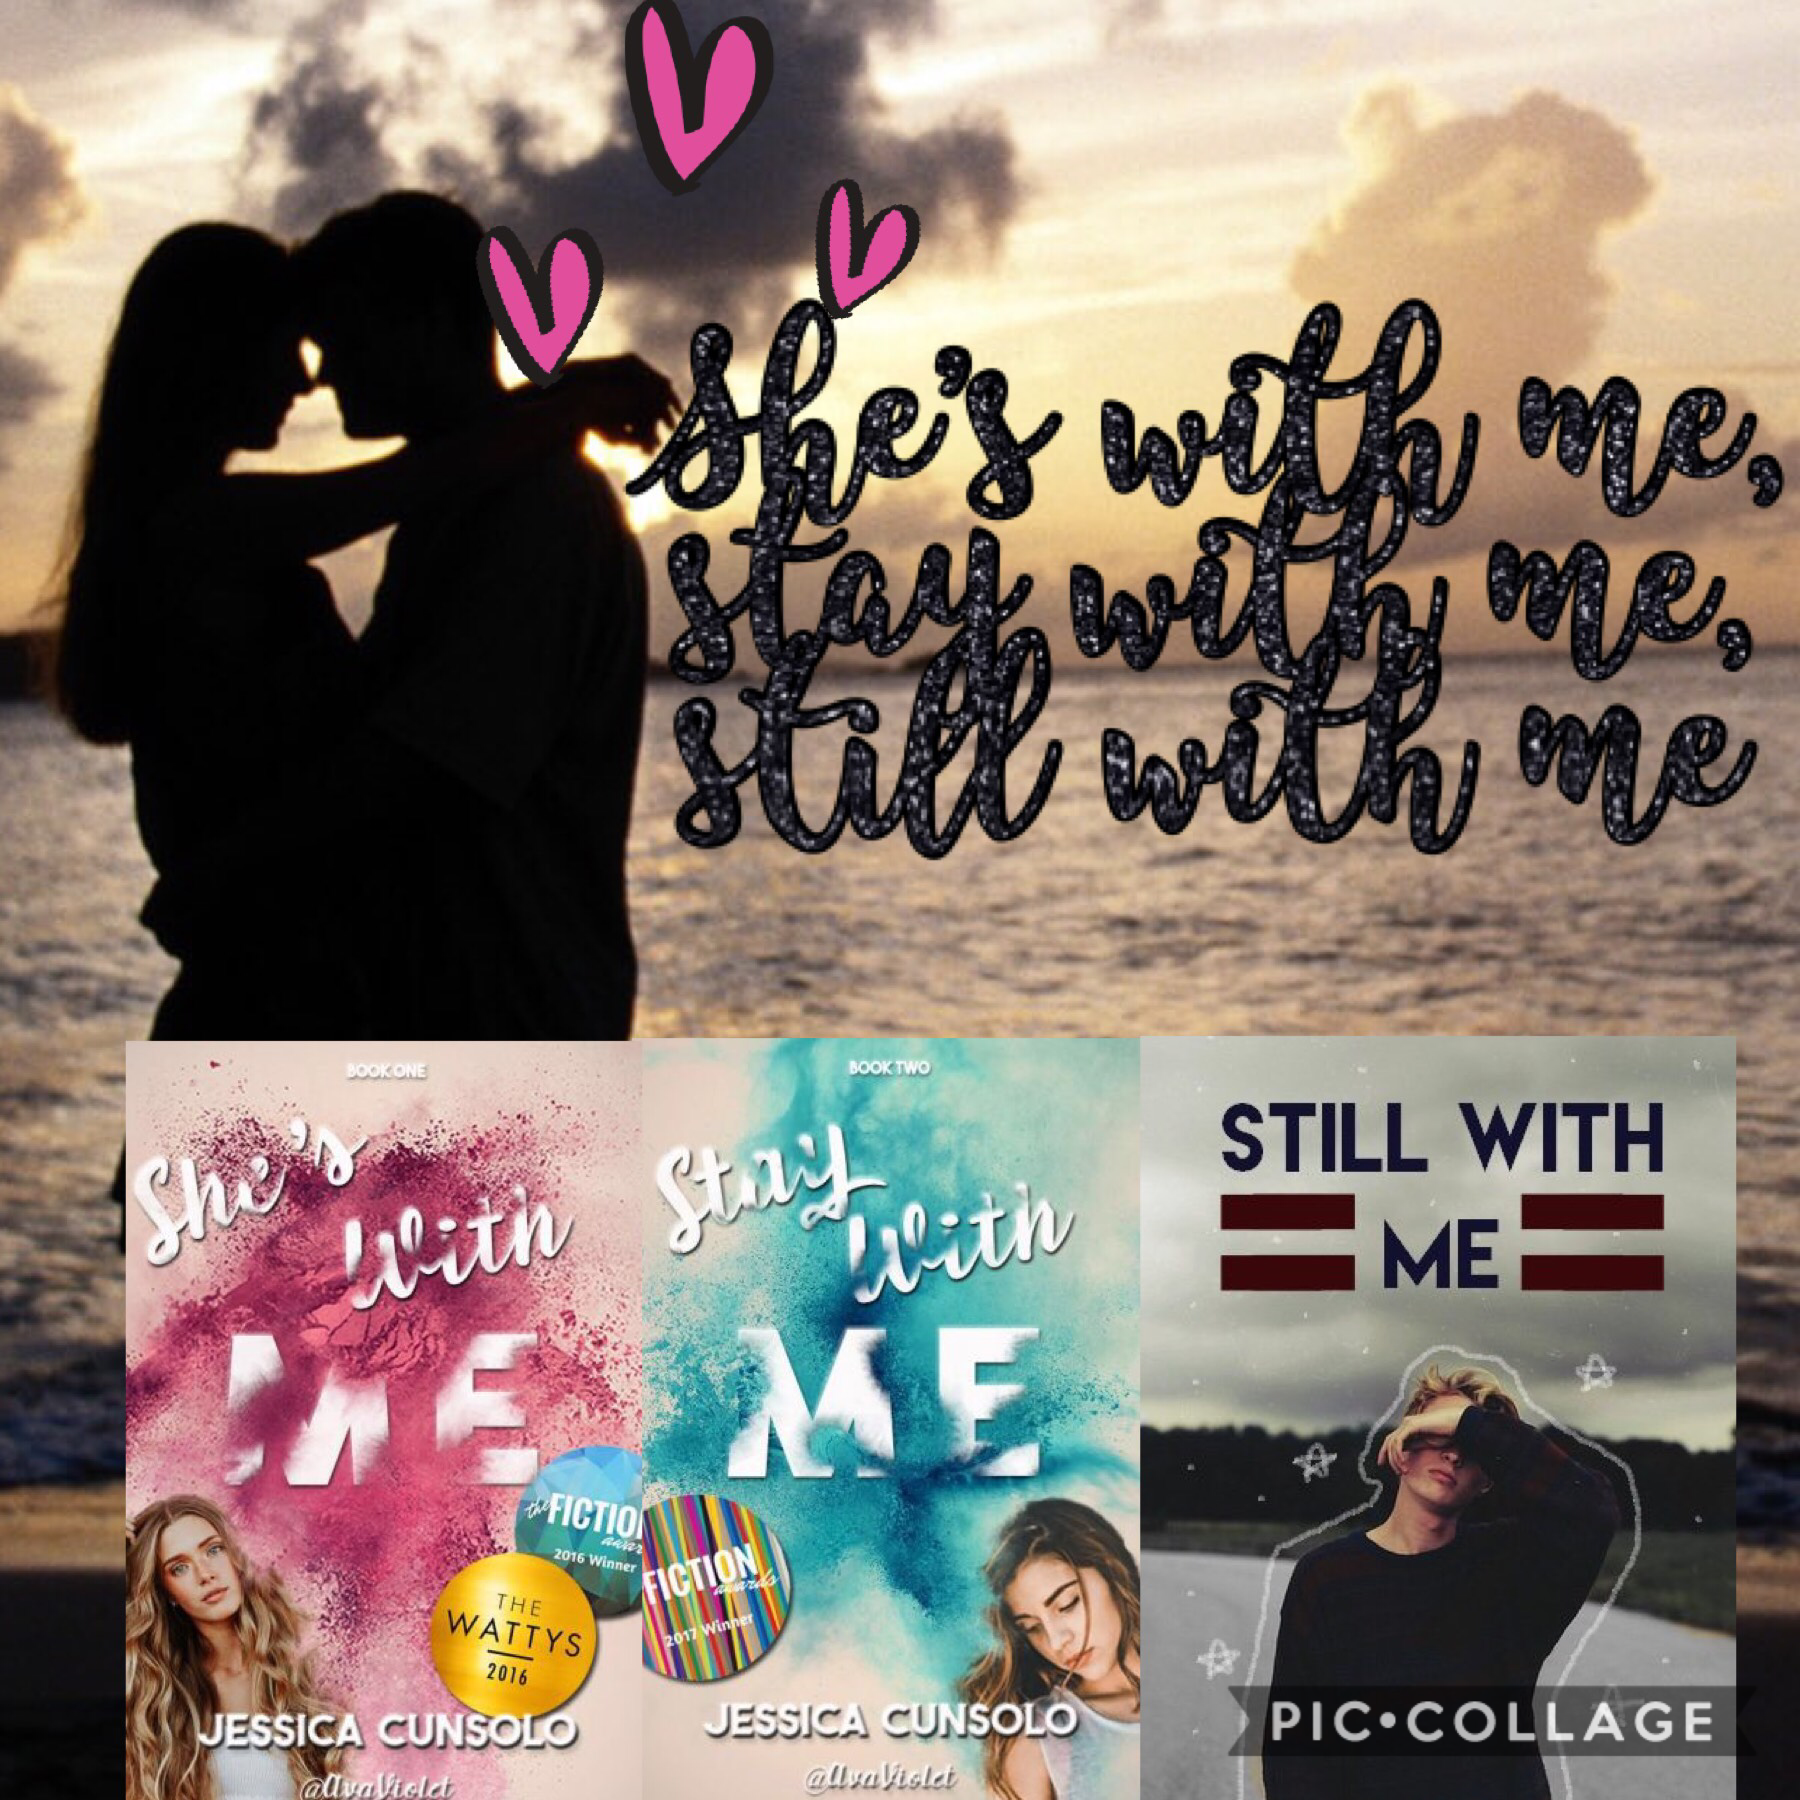 She’s with me
Stay with me
Still with me
An awesome Wattpad novel series!!